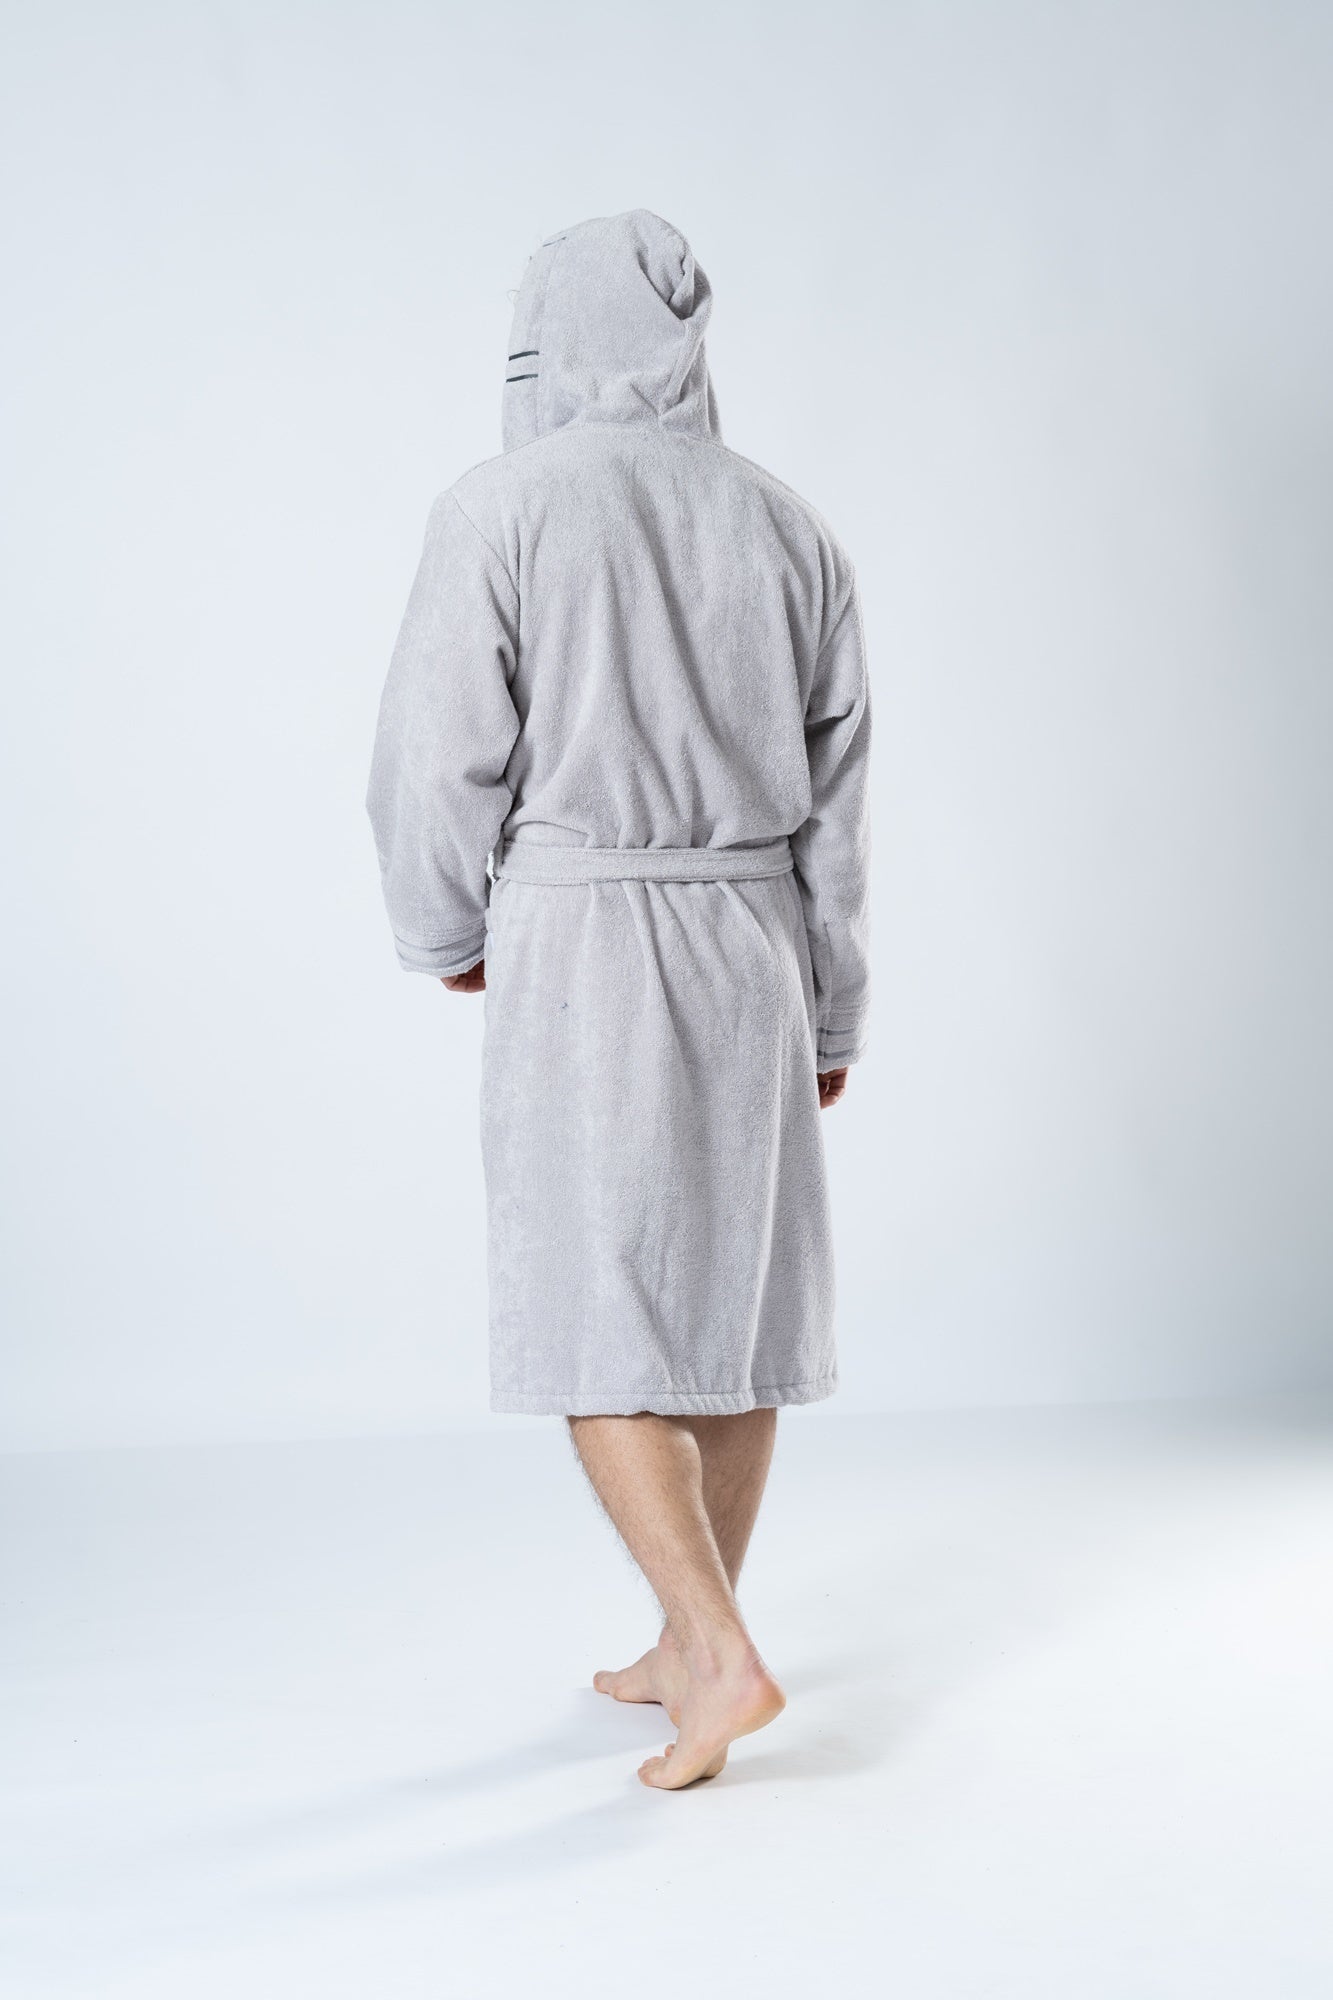 BELMANETTI Dressing Gown with Hood 4345 - Unisex